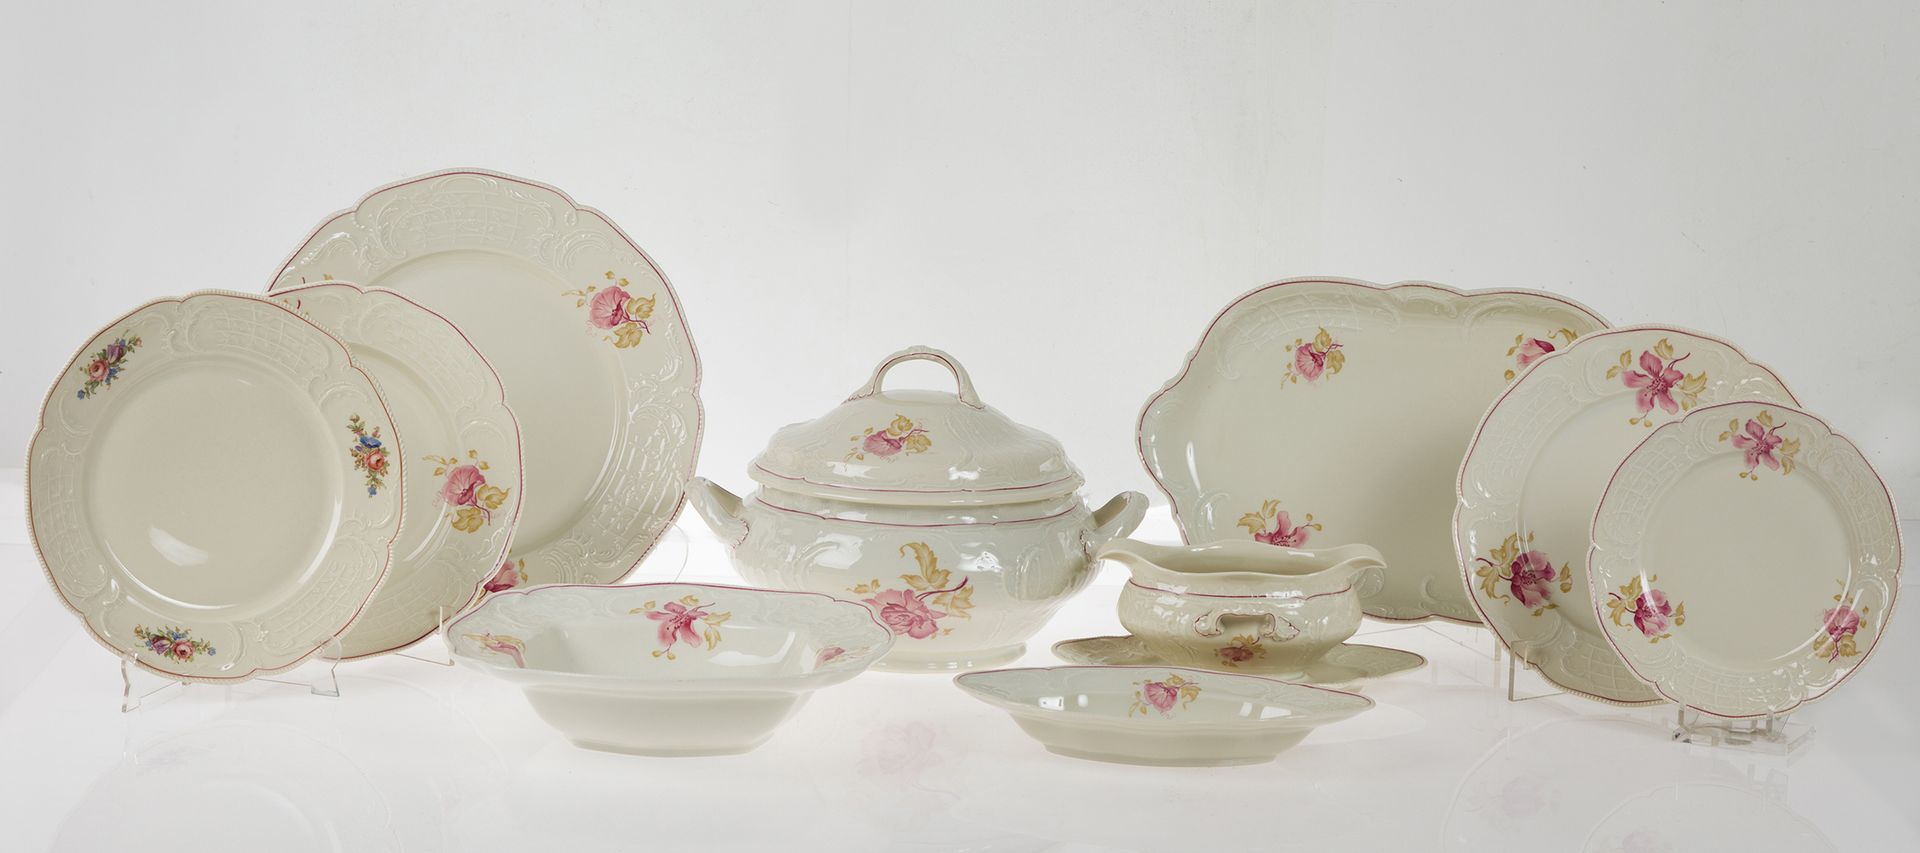 Porcelain tableware with floral decoration Rosenthal Germany 20th c. Servizio da&hellip;